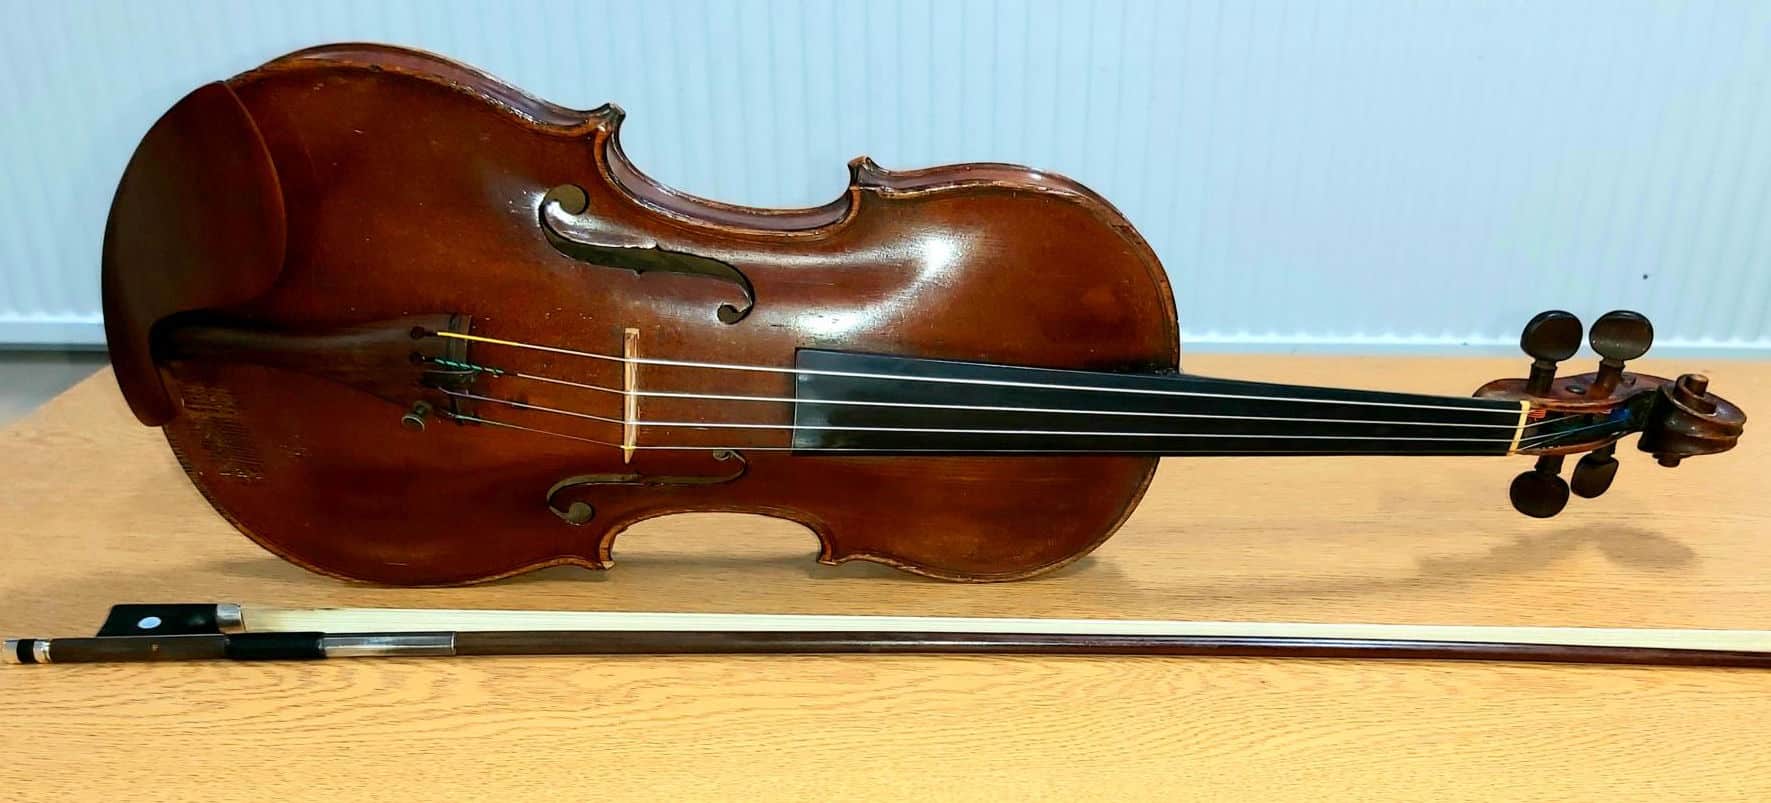 A violin theft with a happy ending